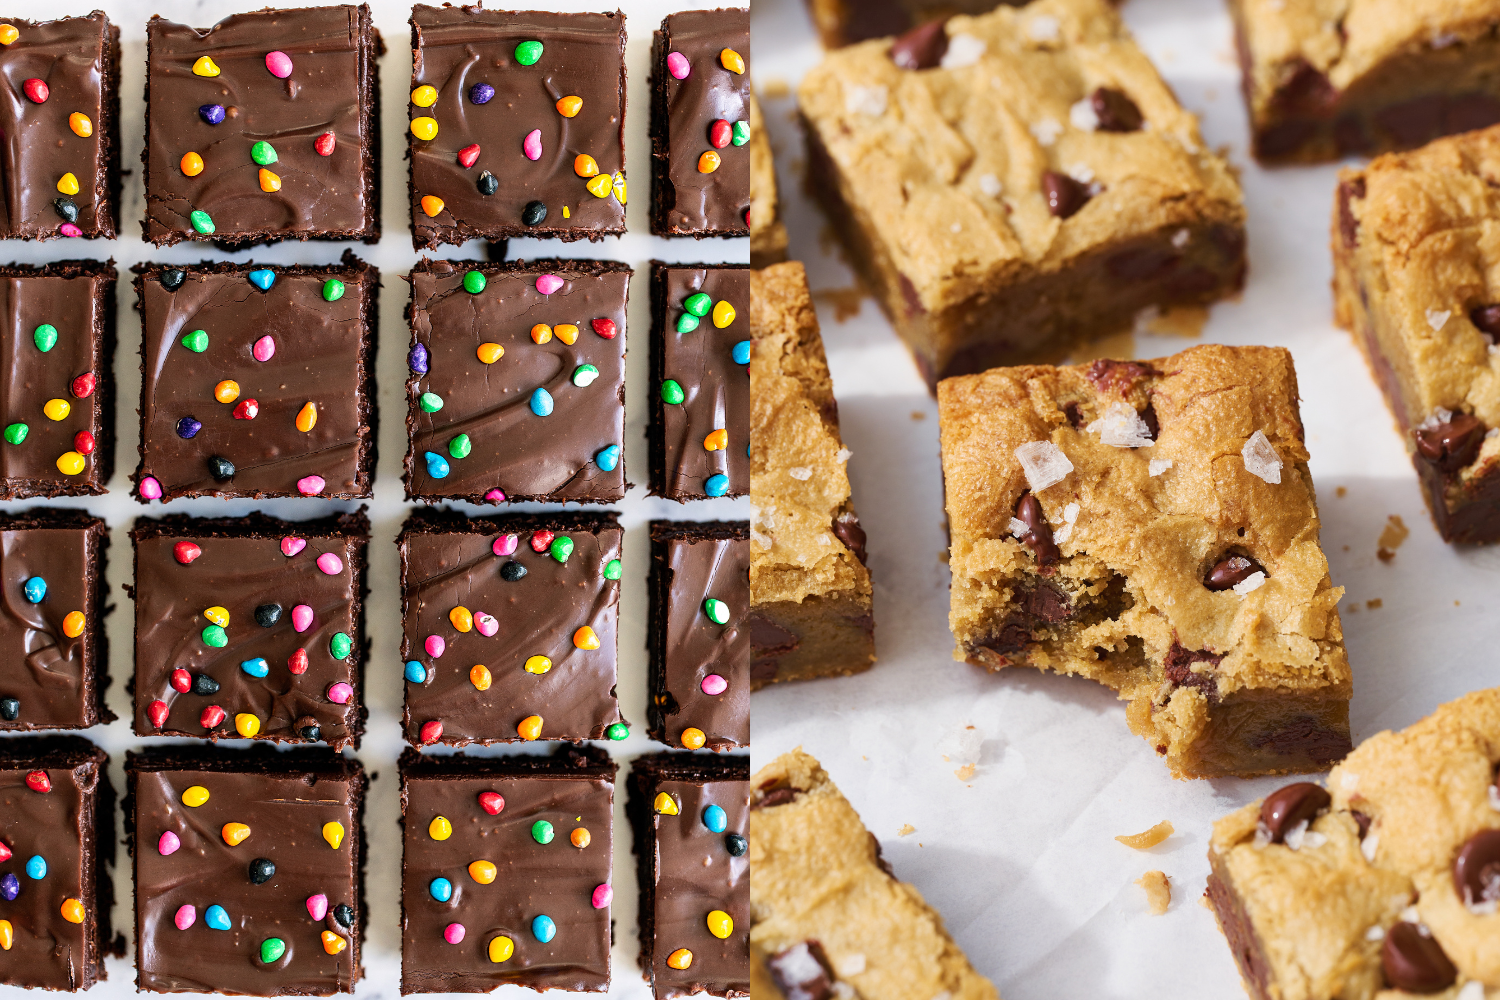 rainbow chip-topped Cosmic Brownies or classic blondies are both great St. Patrick's Day dessert recipes.